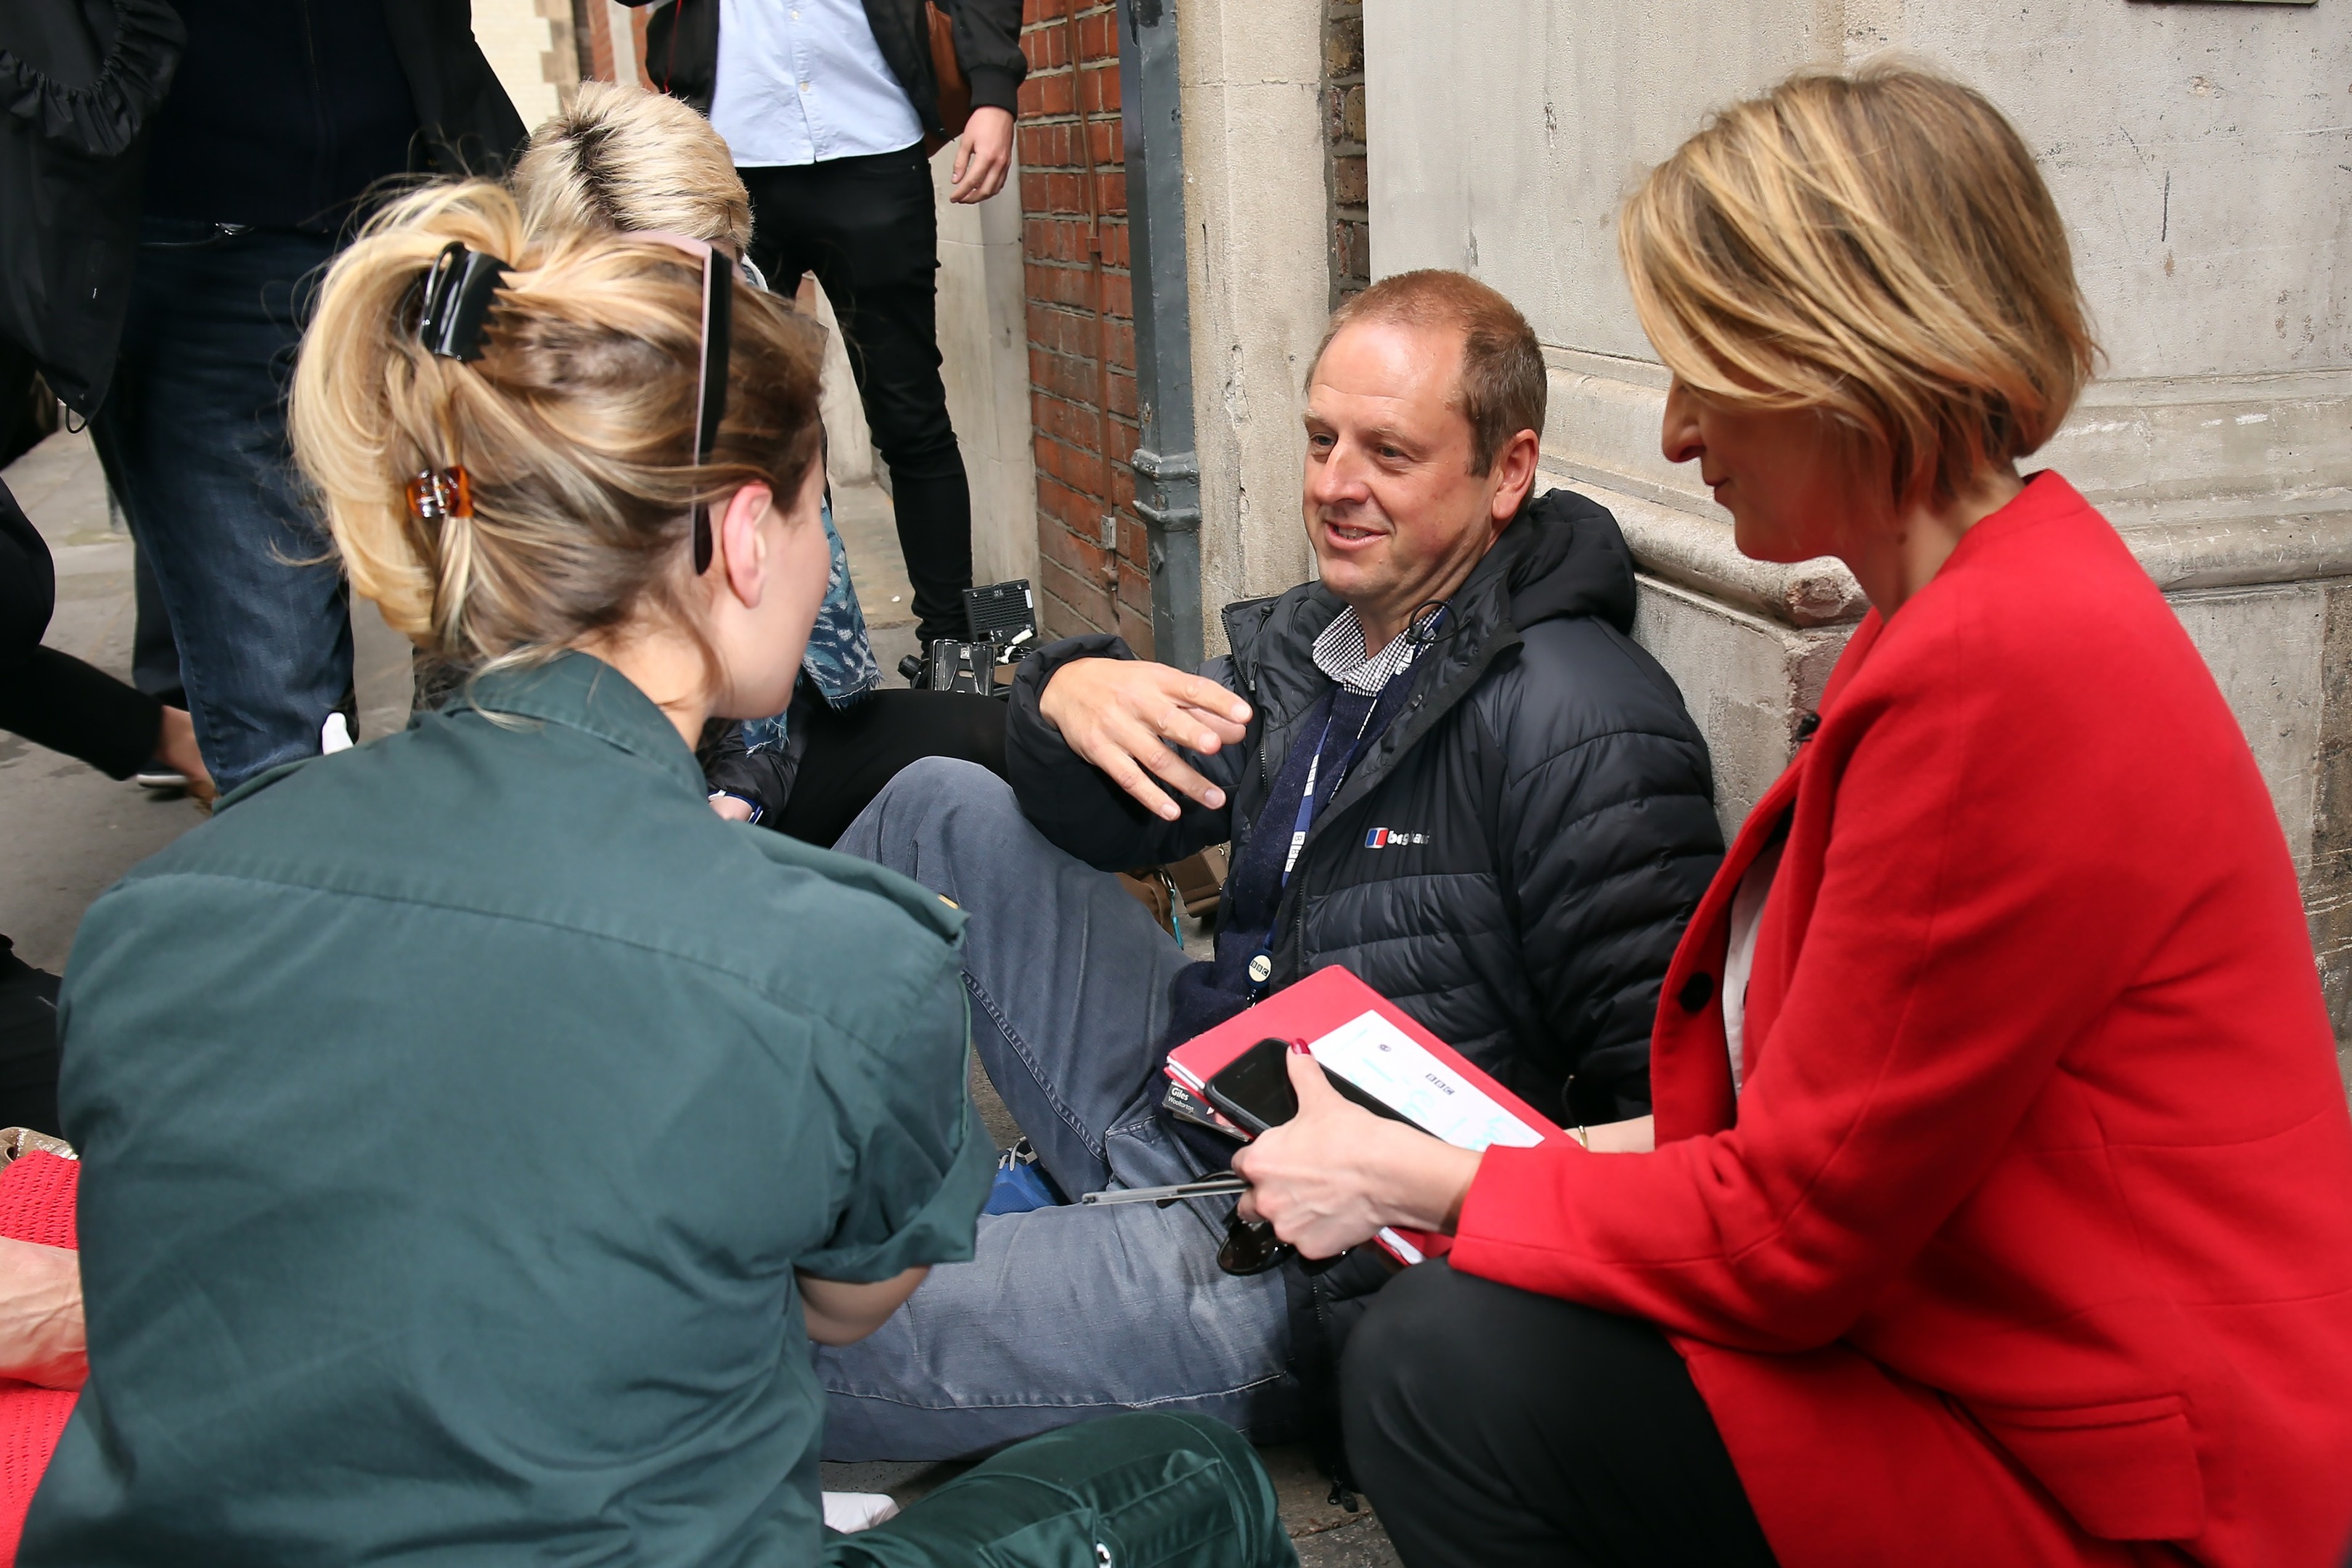 BBC Cameraman Giles Wooltorton is helped by Ambulance staff after reportedly being hit by Labour Leader Jeremy Corbyn's vehicle outside Savoy Place, as BBC reporter Laura Kuenssberg (R) looks on (Neil P. Mockford/Getty Images)